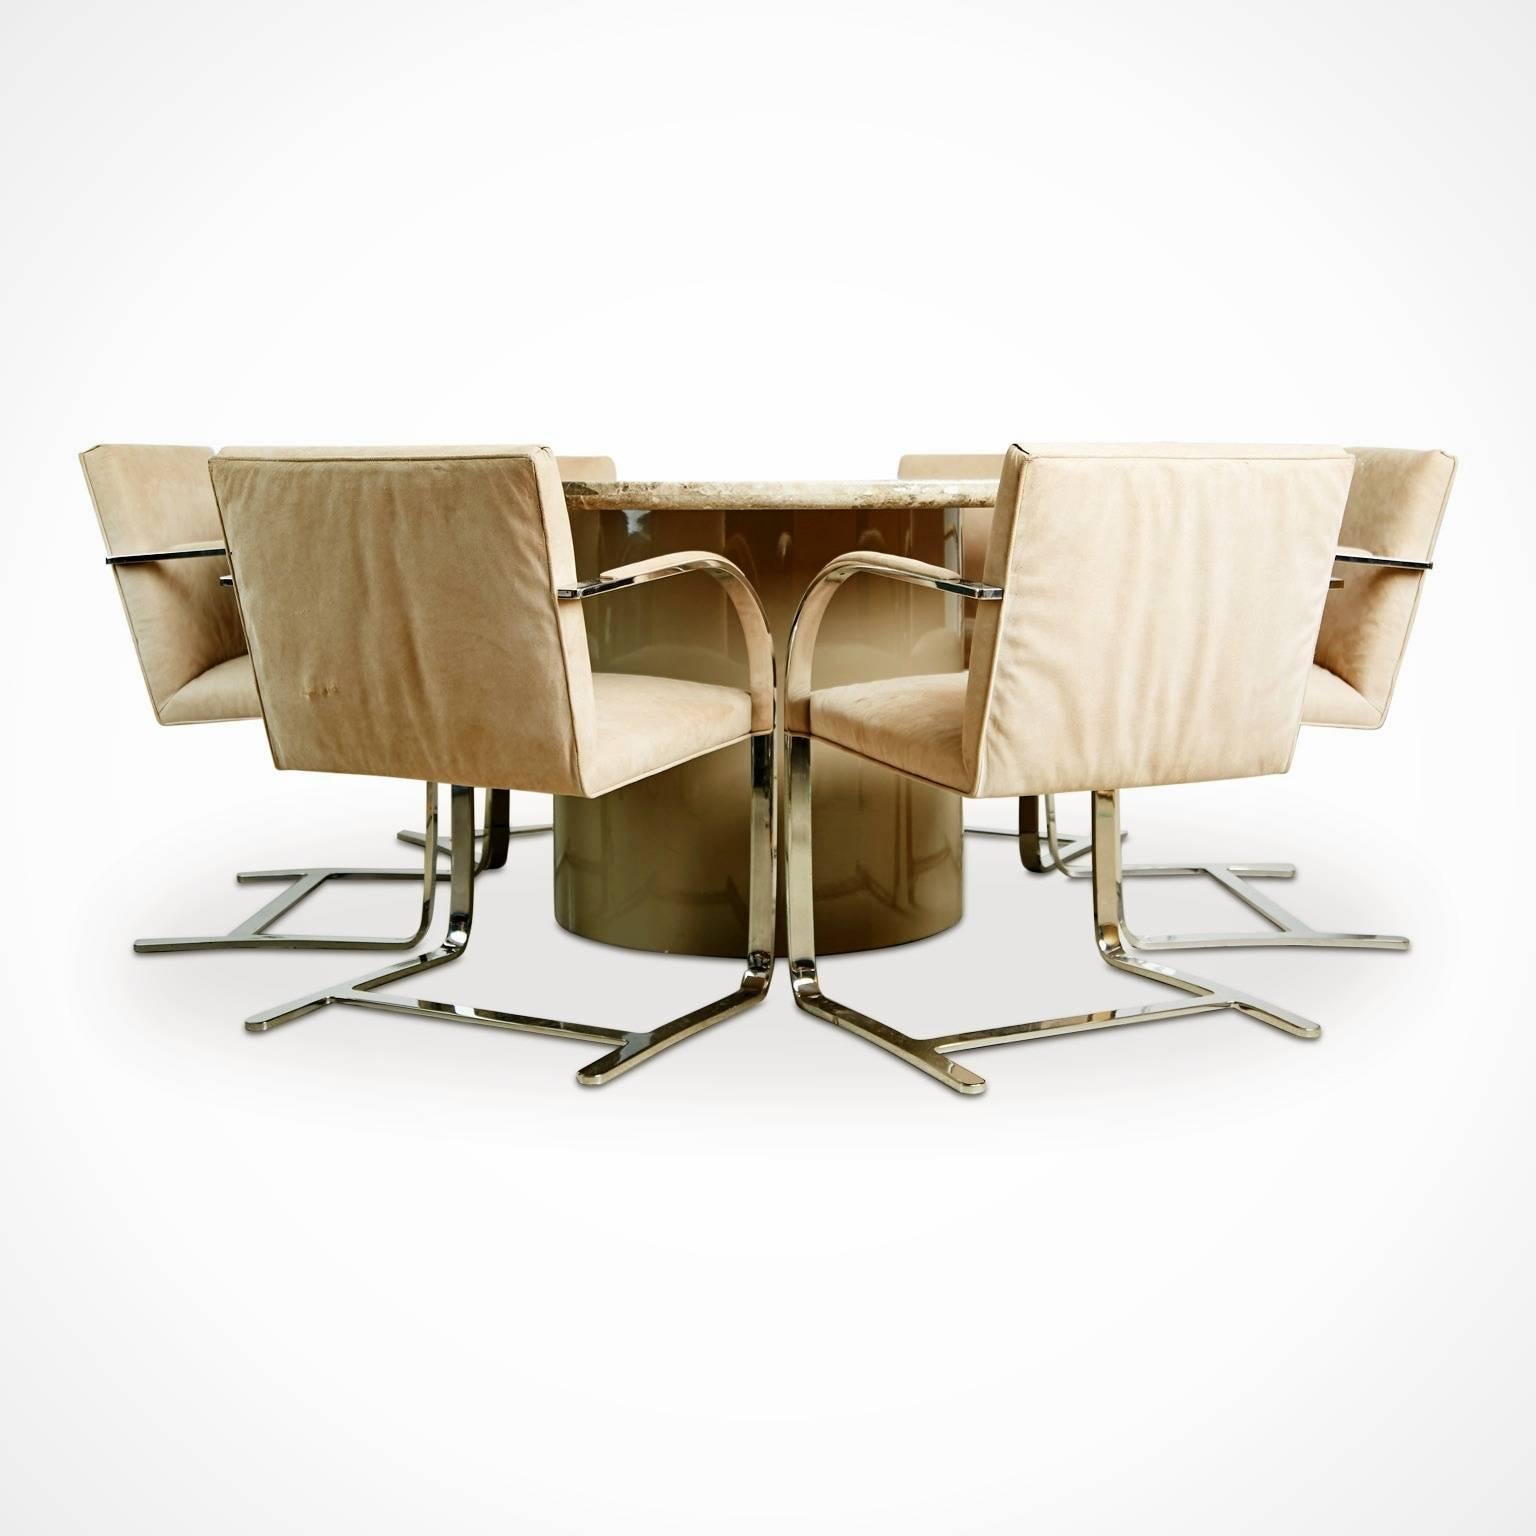 This pairing of six (6) chrome flat bar dining chairs by Brueton and a commanding 60